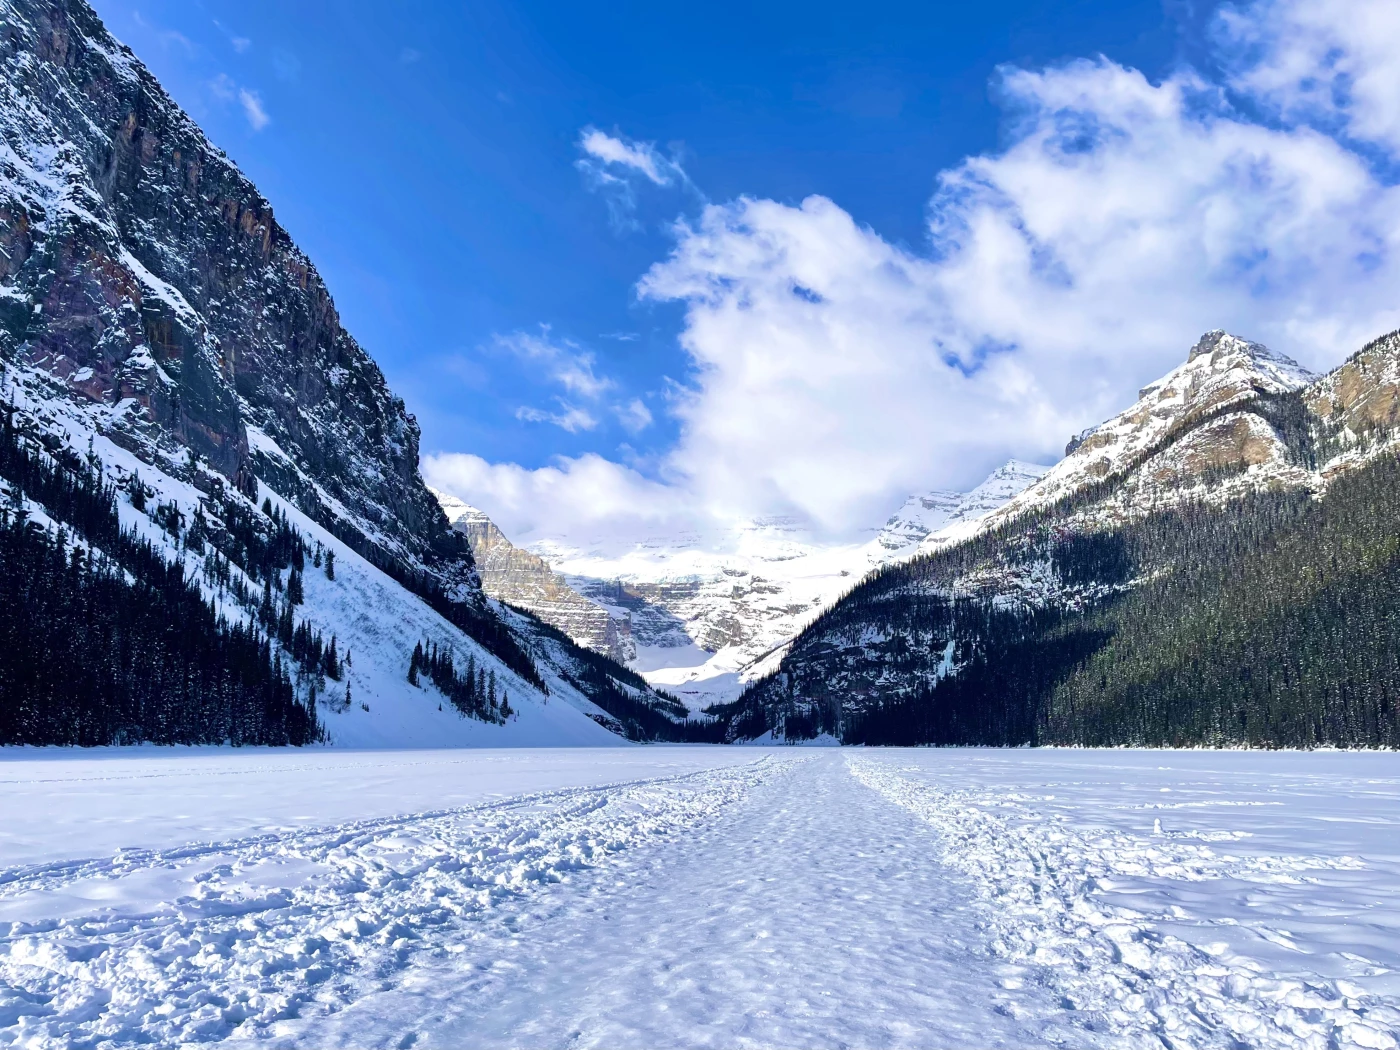 Lake Louise (Banff, Canada) in its frozen glory! Waking up early to capture this moment - just me, t...